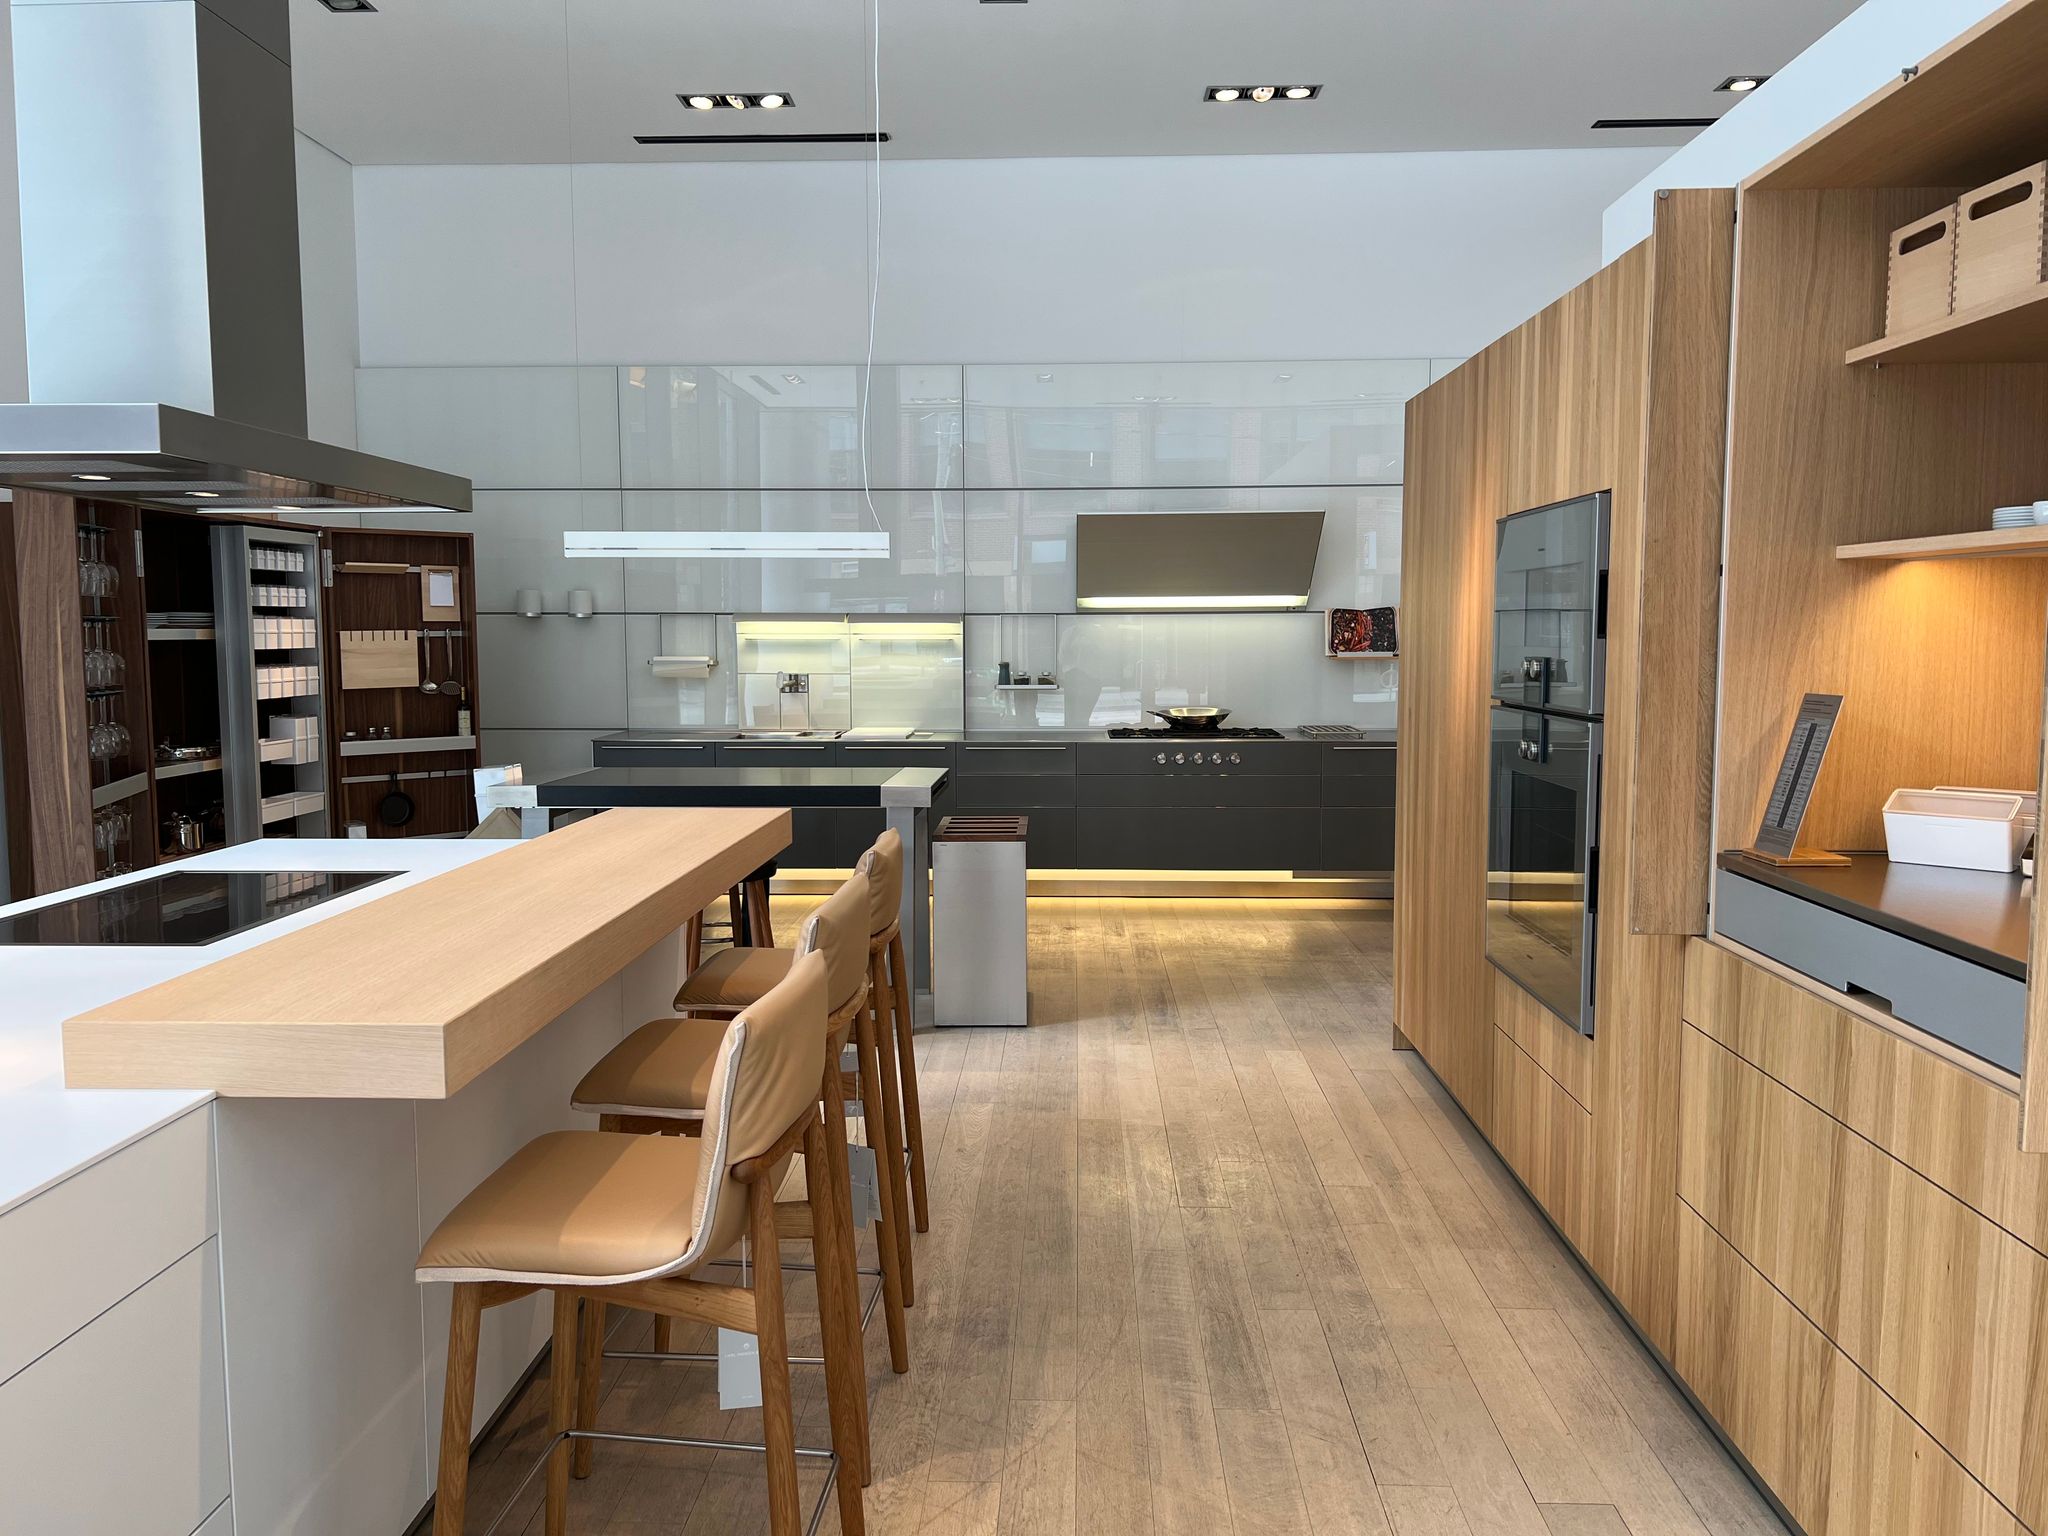 bulthaup toronto install kscape for a new kitchen experience